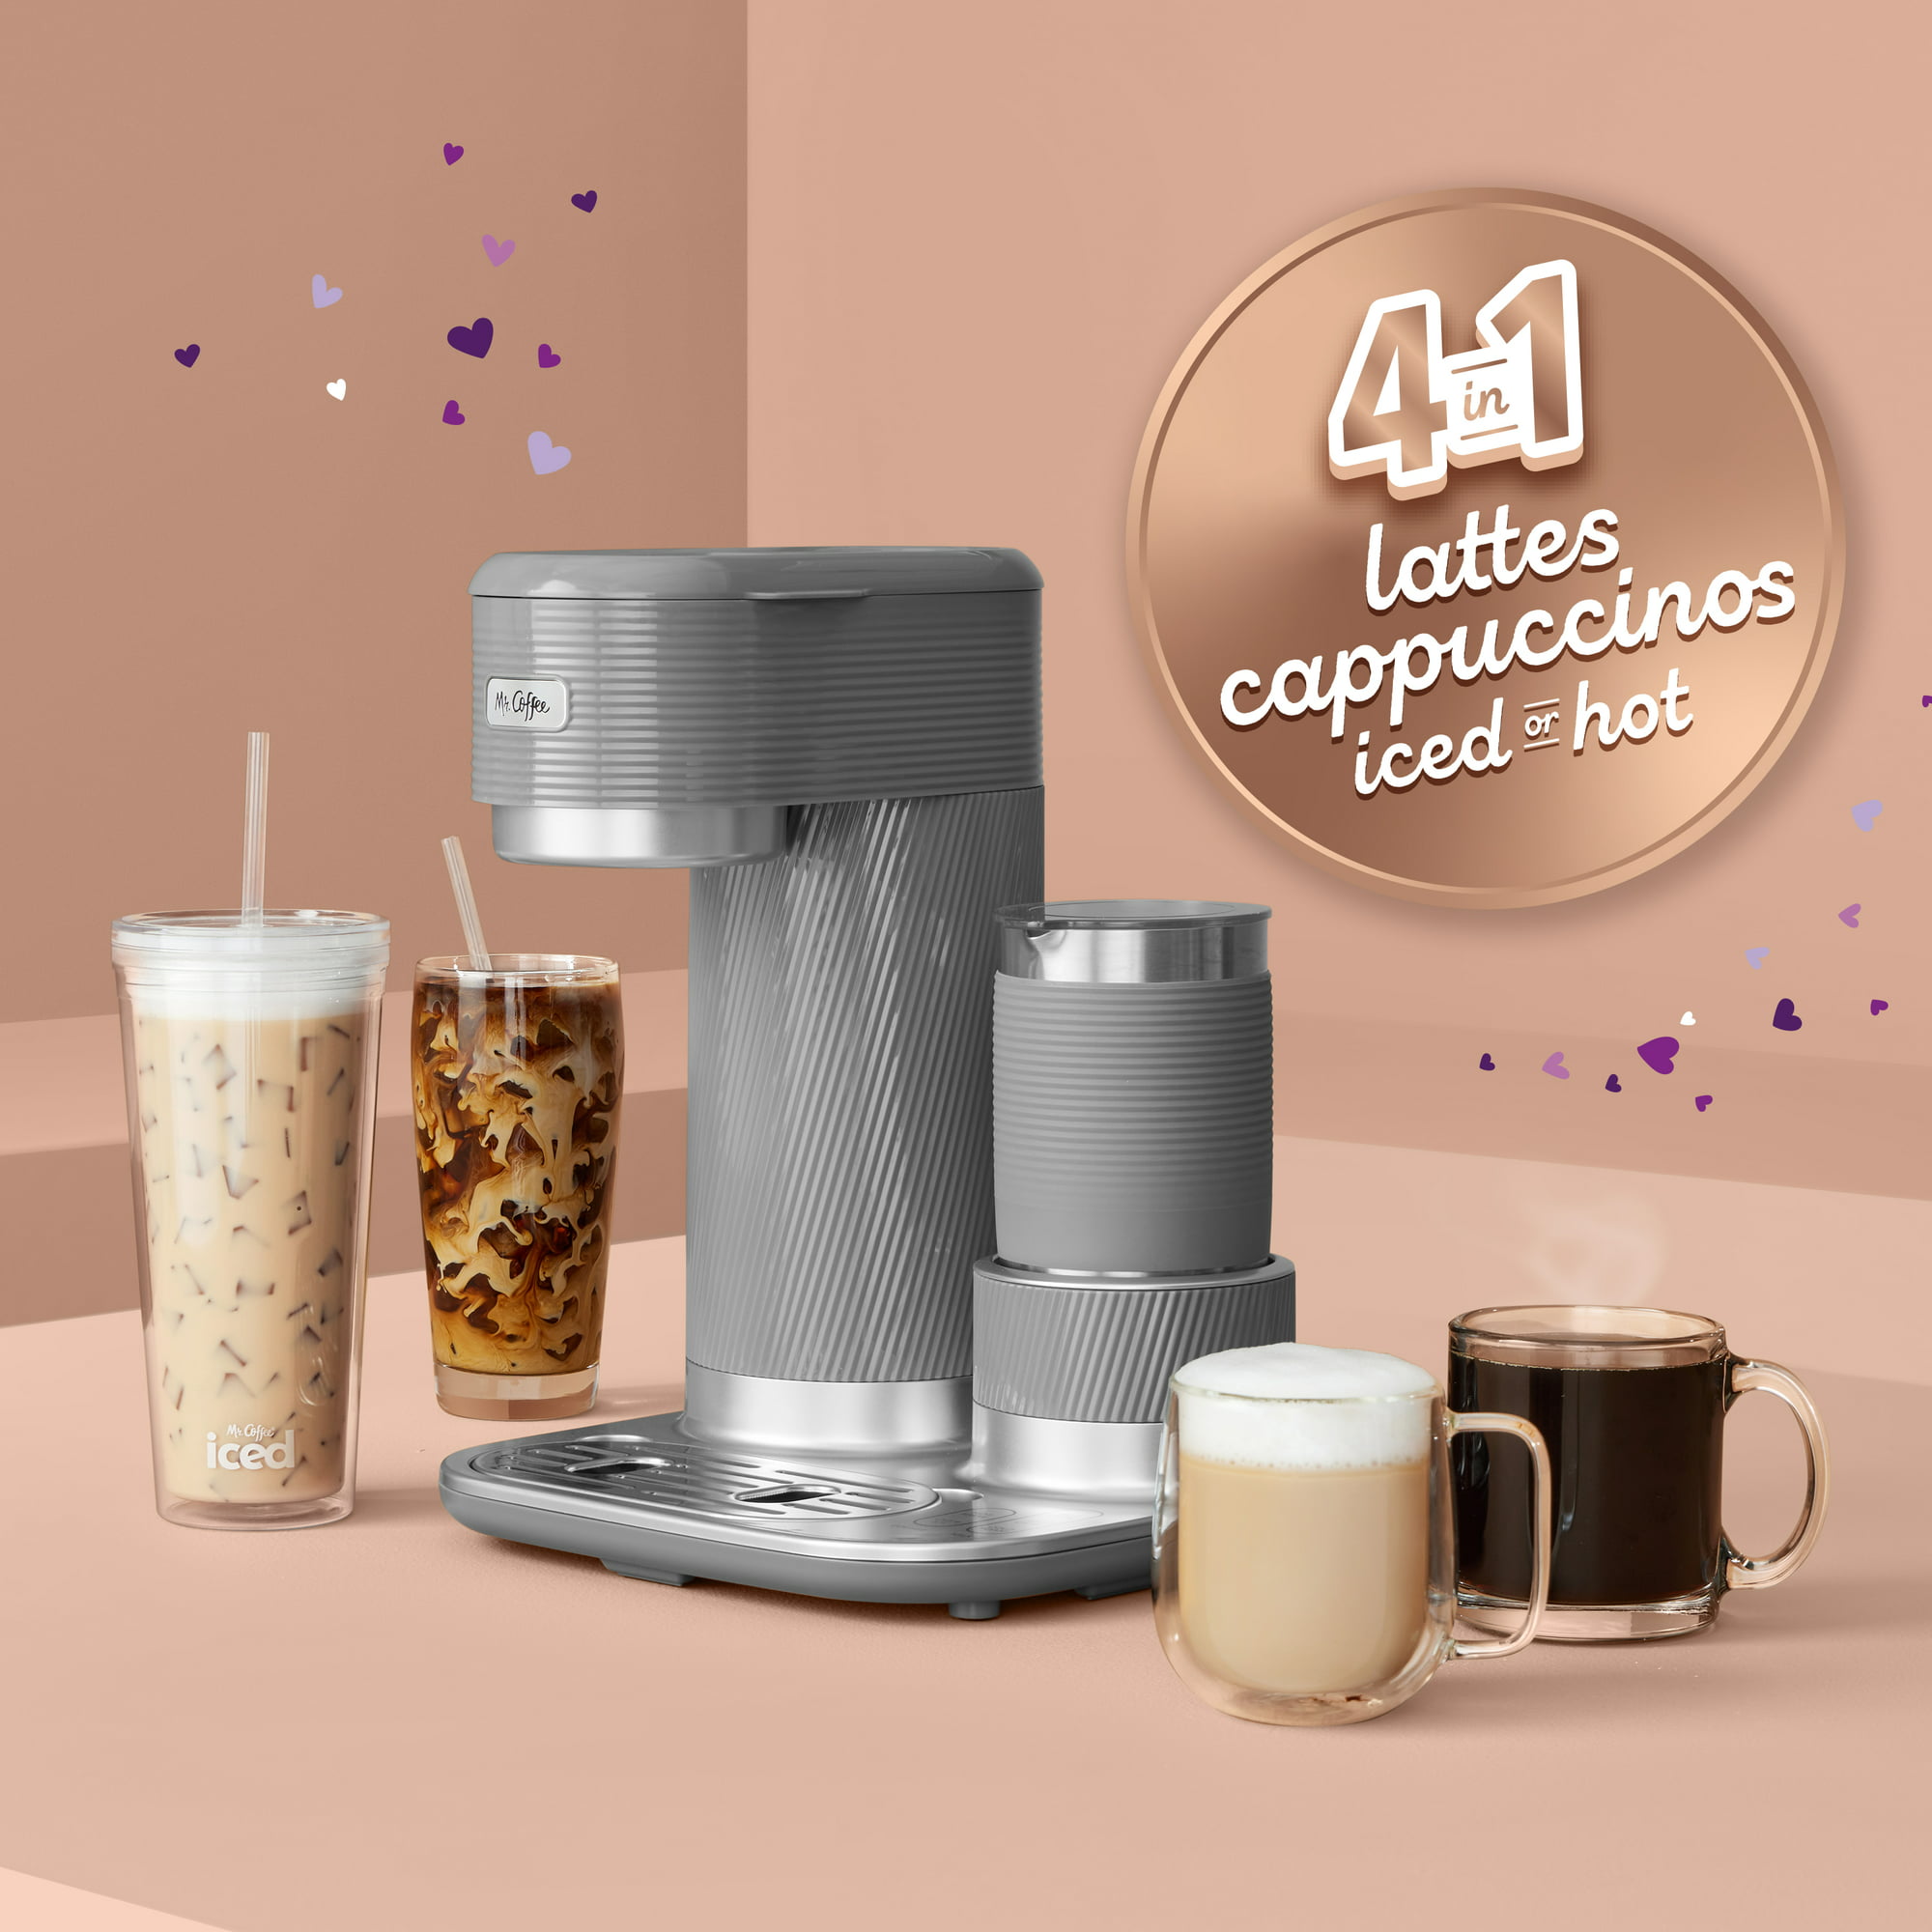 https://themarketdepot.com/wp-content/uploads/2023/01/Mr.-Coffee-4-in-1-Single-Serve-Latte-Lux-Iced-and-Hot-Coffee-Maker-Gray-5.jpeg